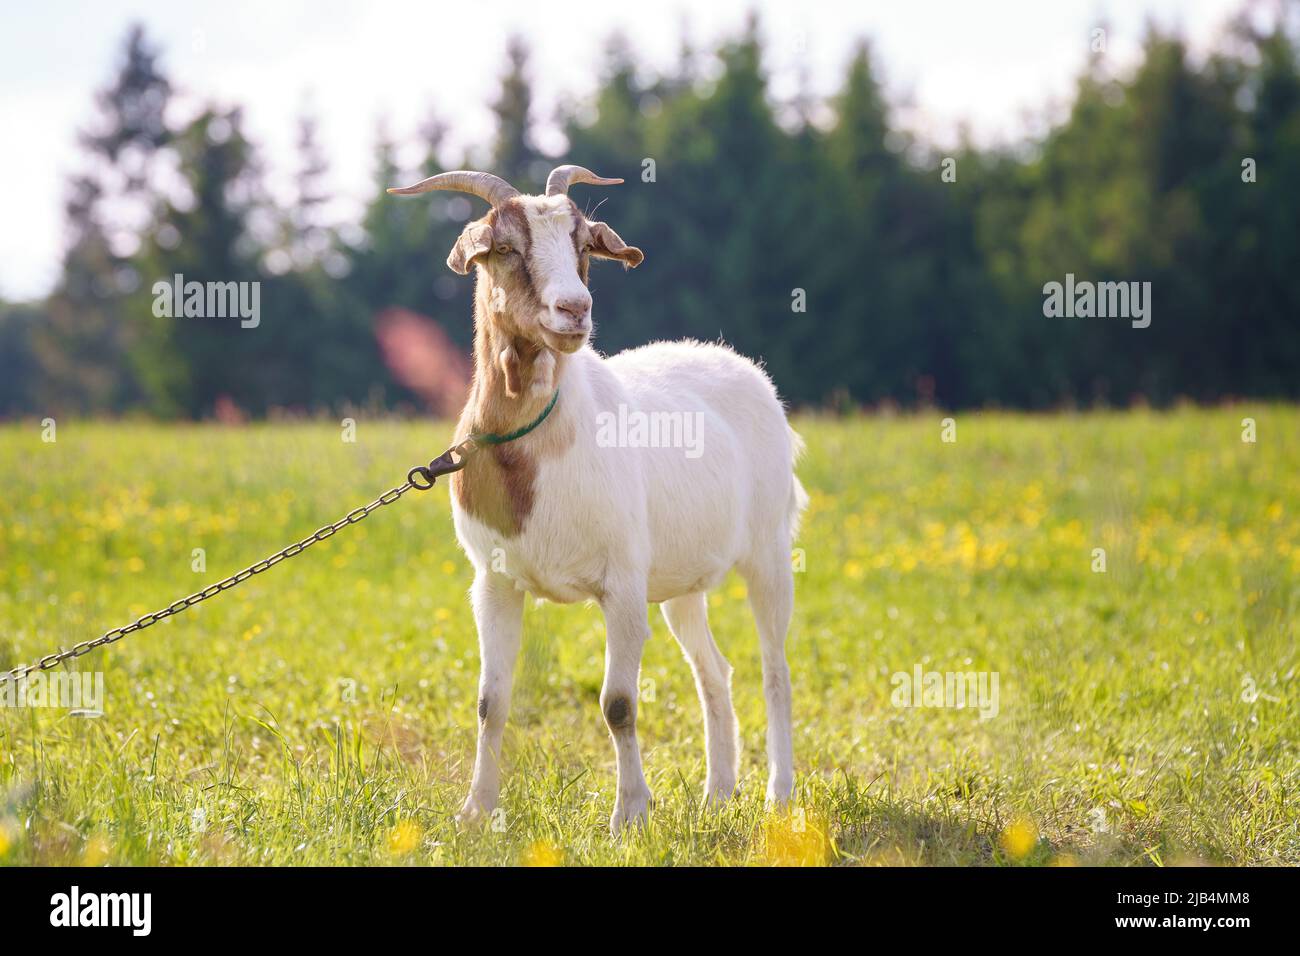 A white horned goat head on blurry natural background Stock Photo